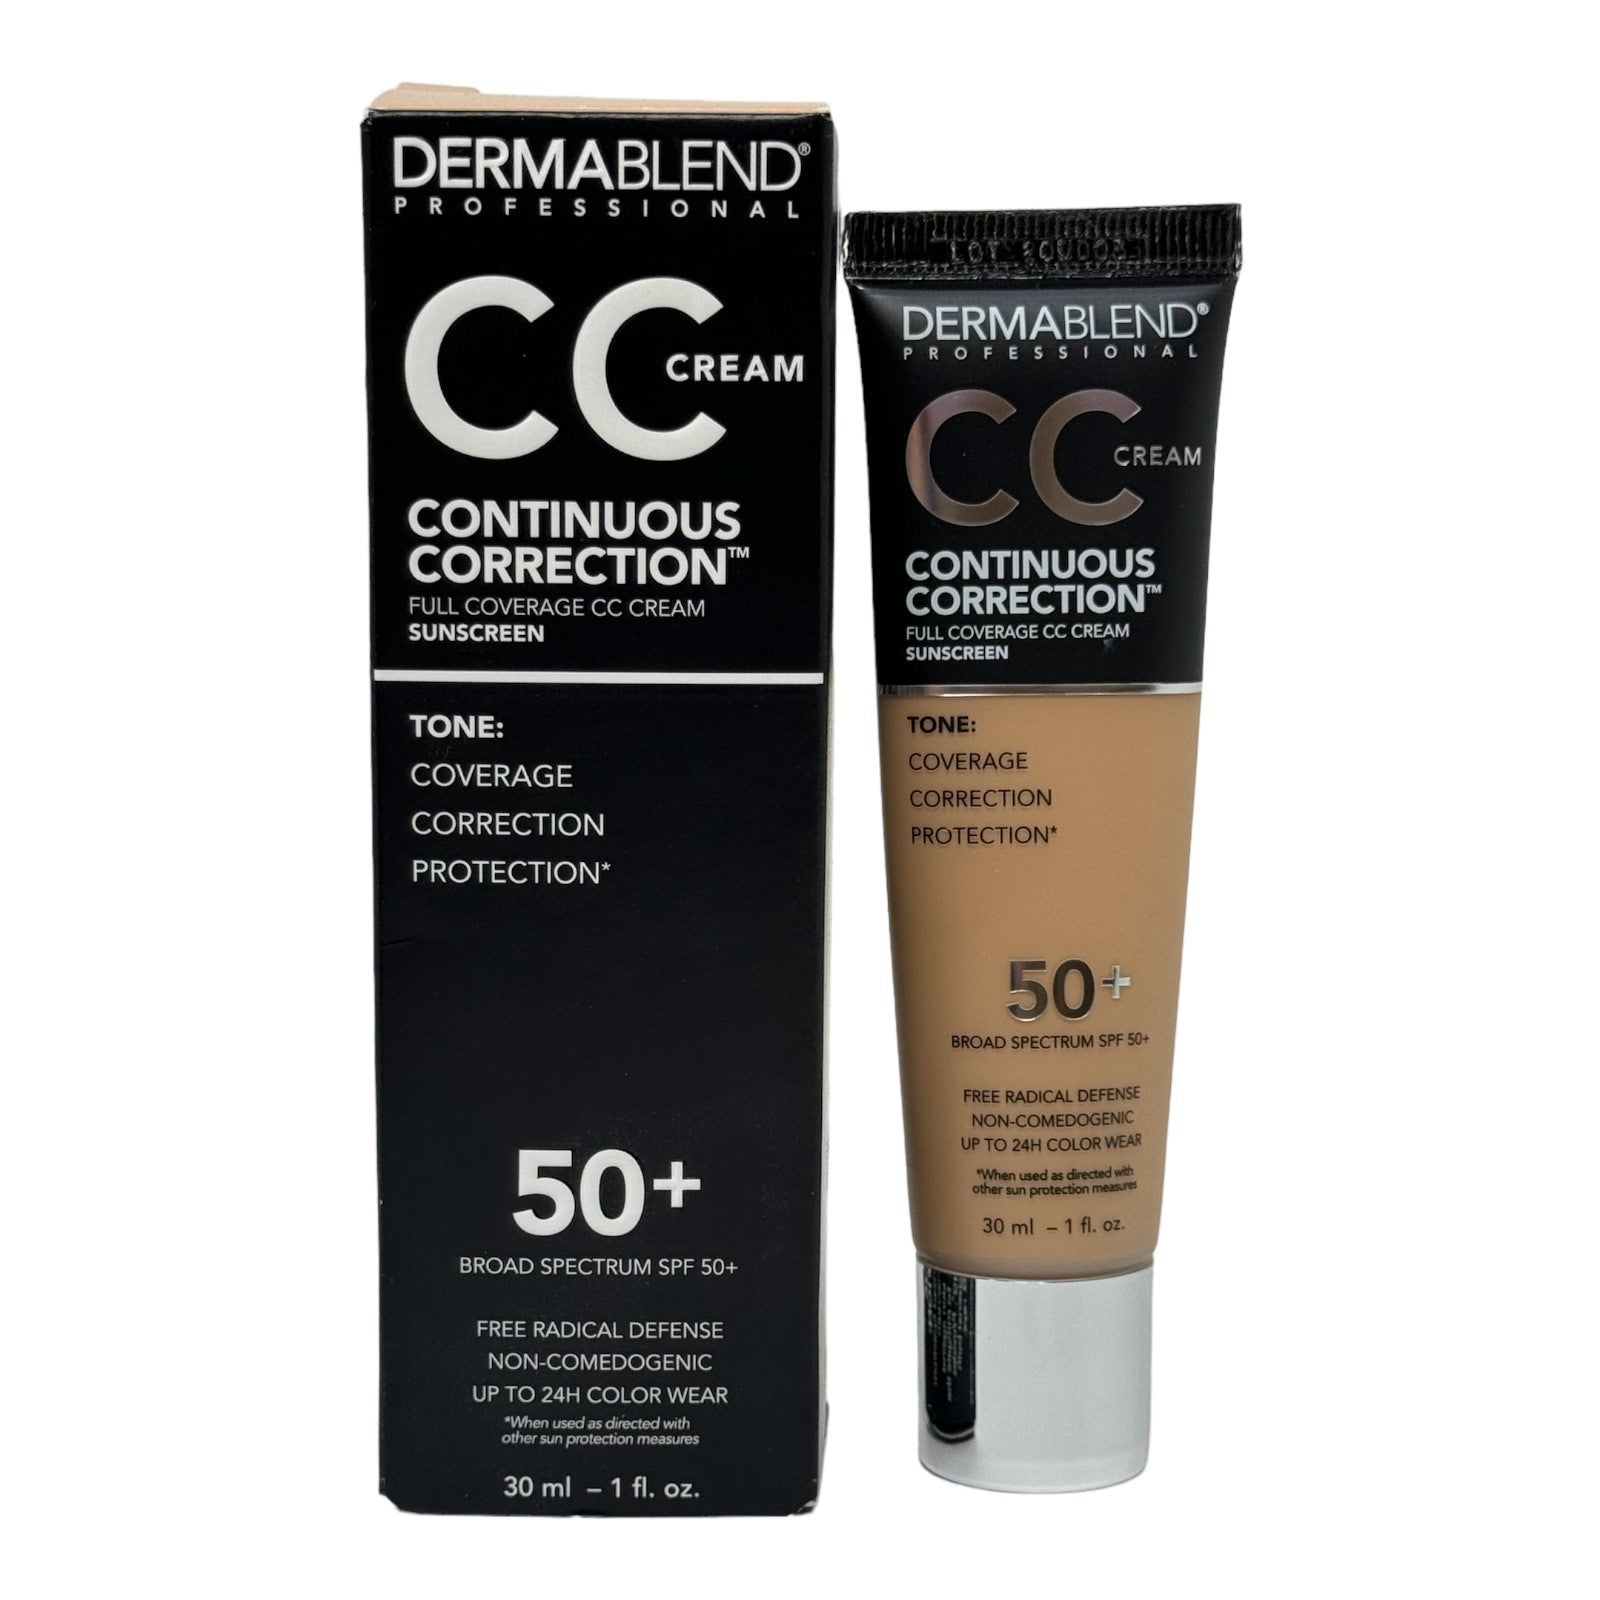 Dermablend Professional Continuous Correction CC Cream SPF50+ 35N Light to Medium